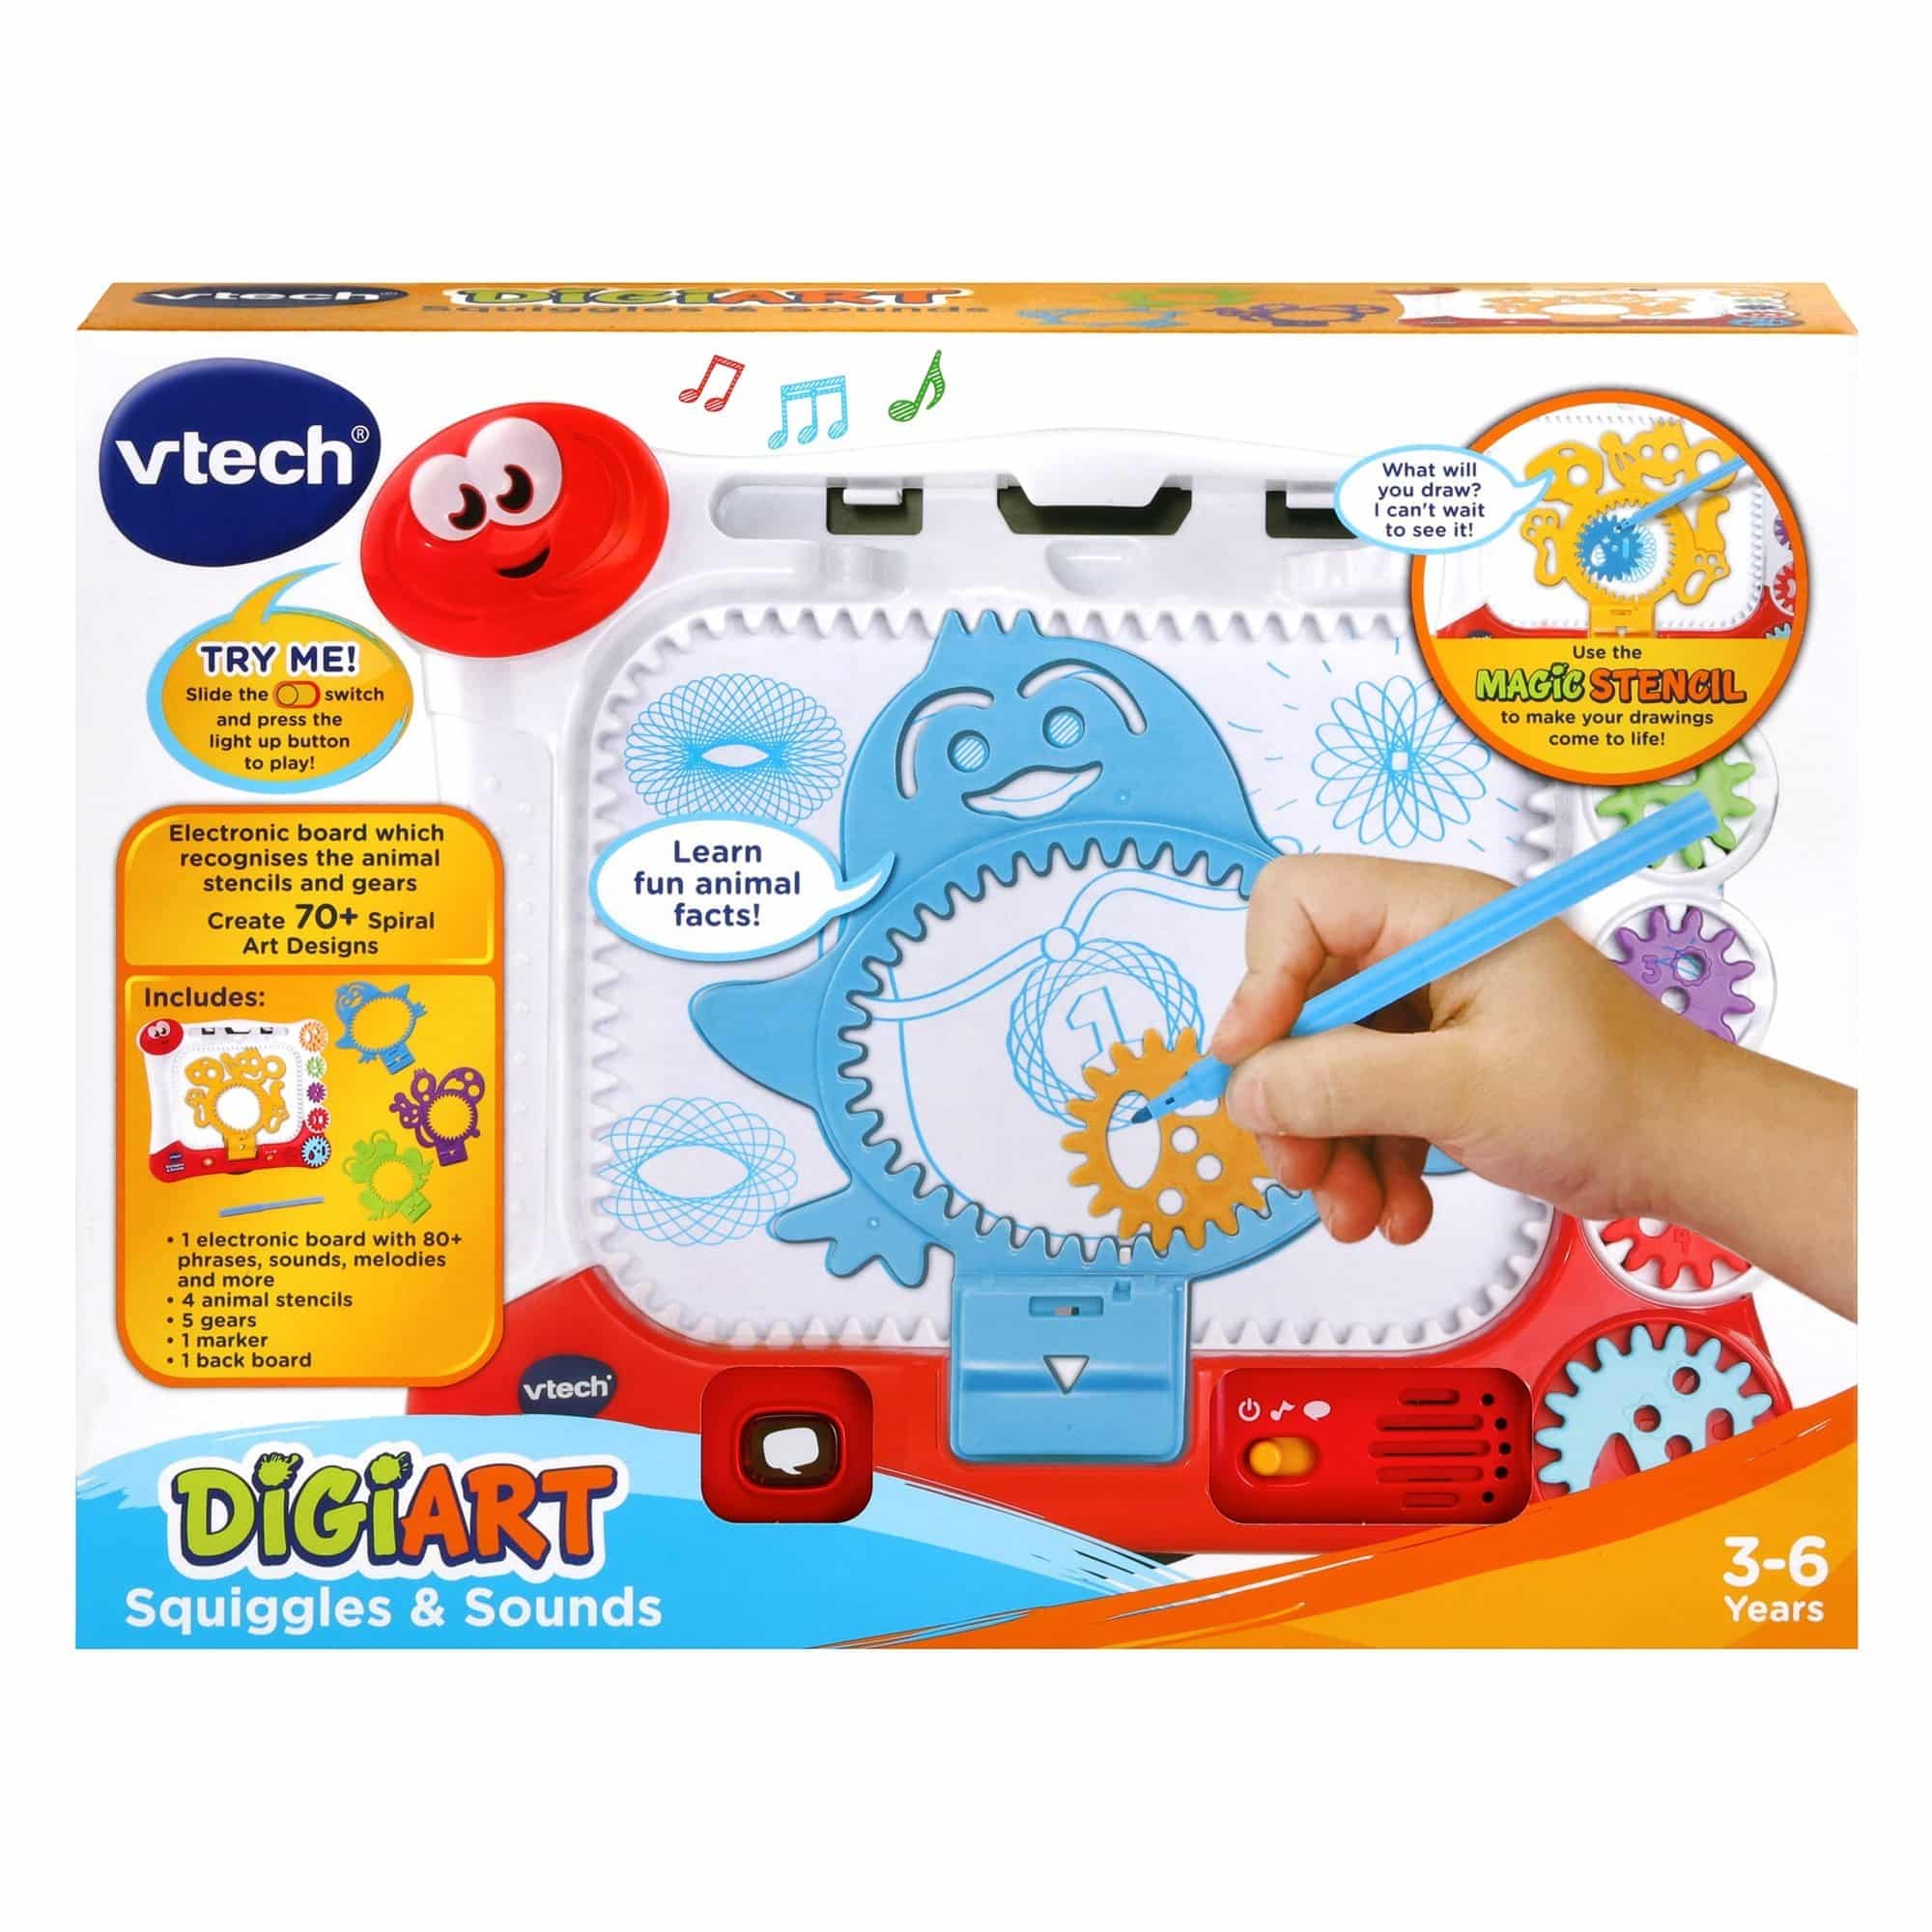 Vtech - DigiArt Squiggles & Sounds